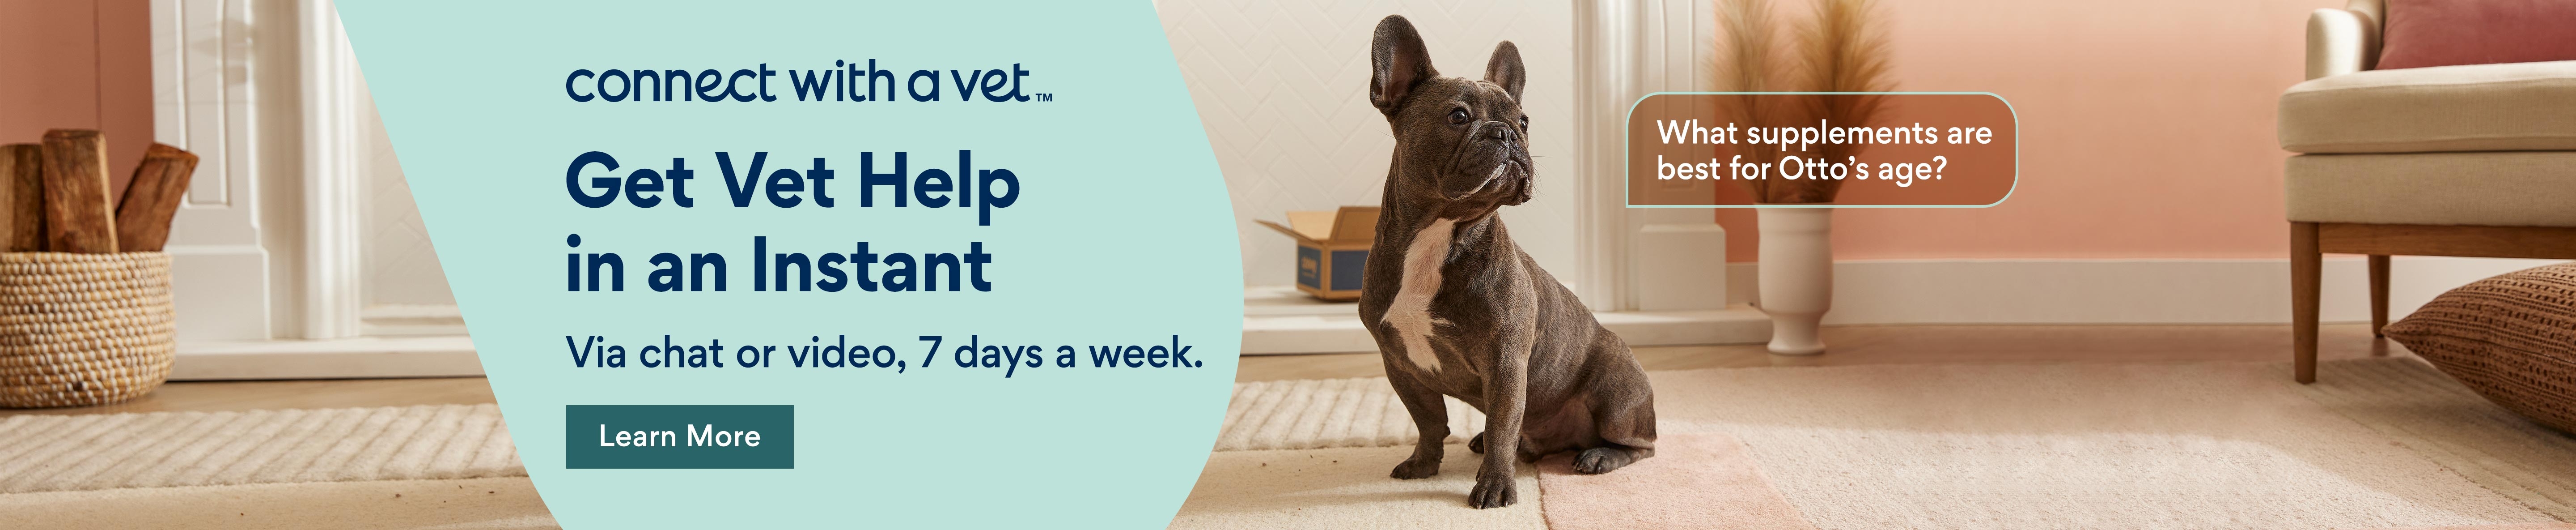 get vet help in an instant. via chat or , 7 days a week